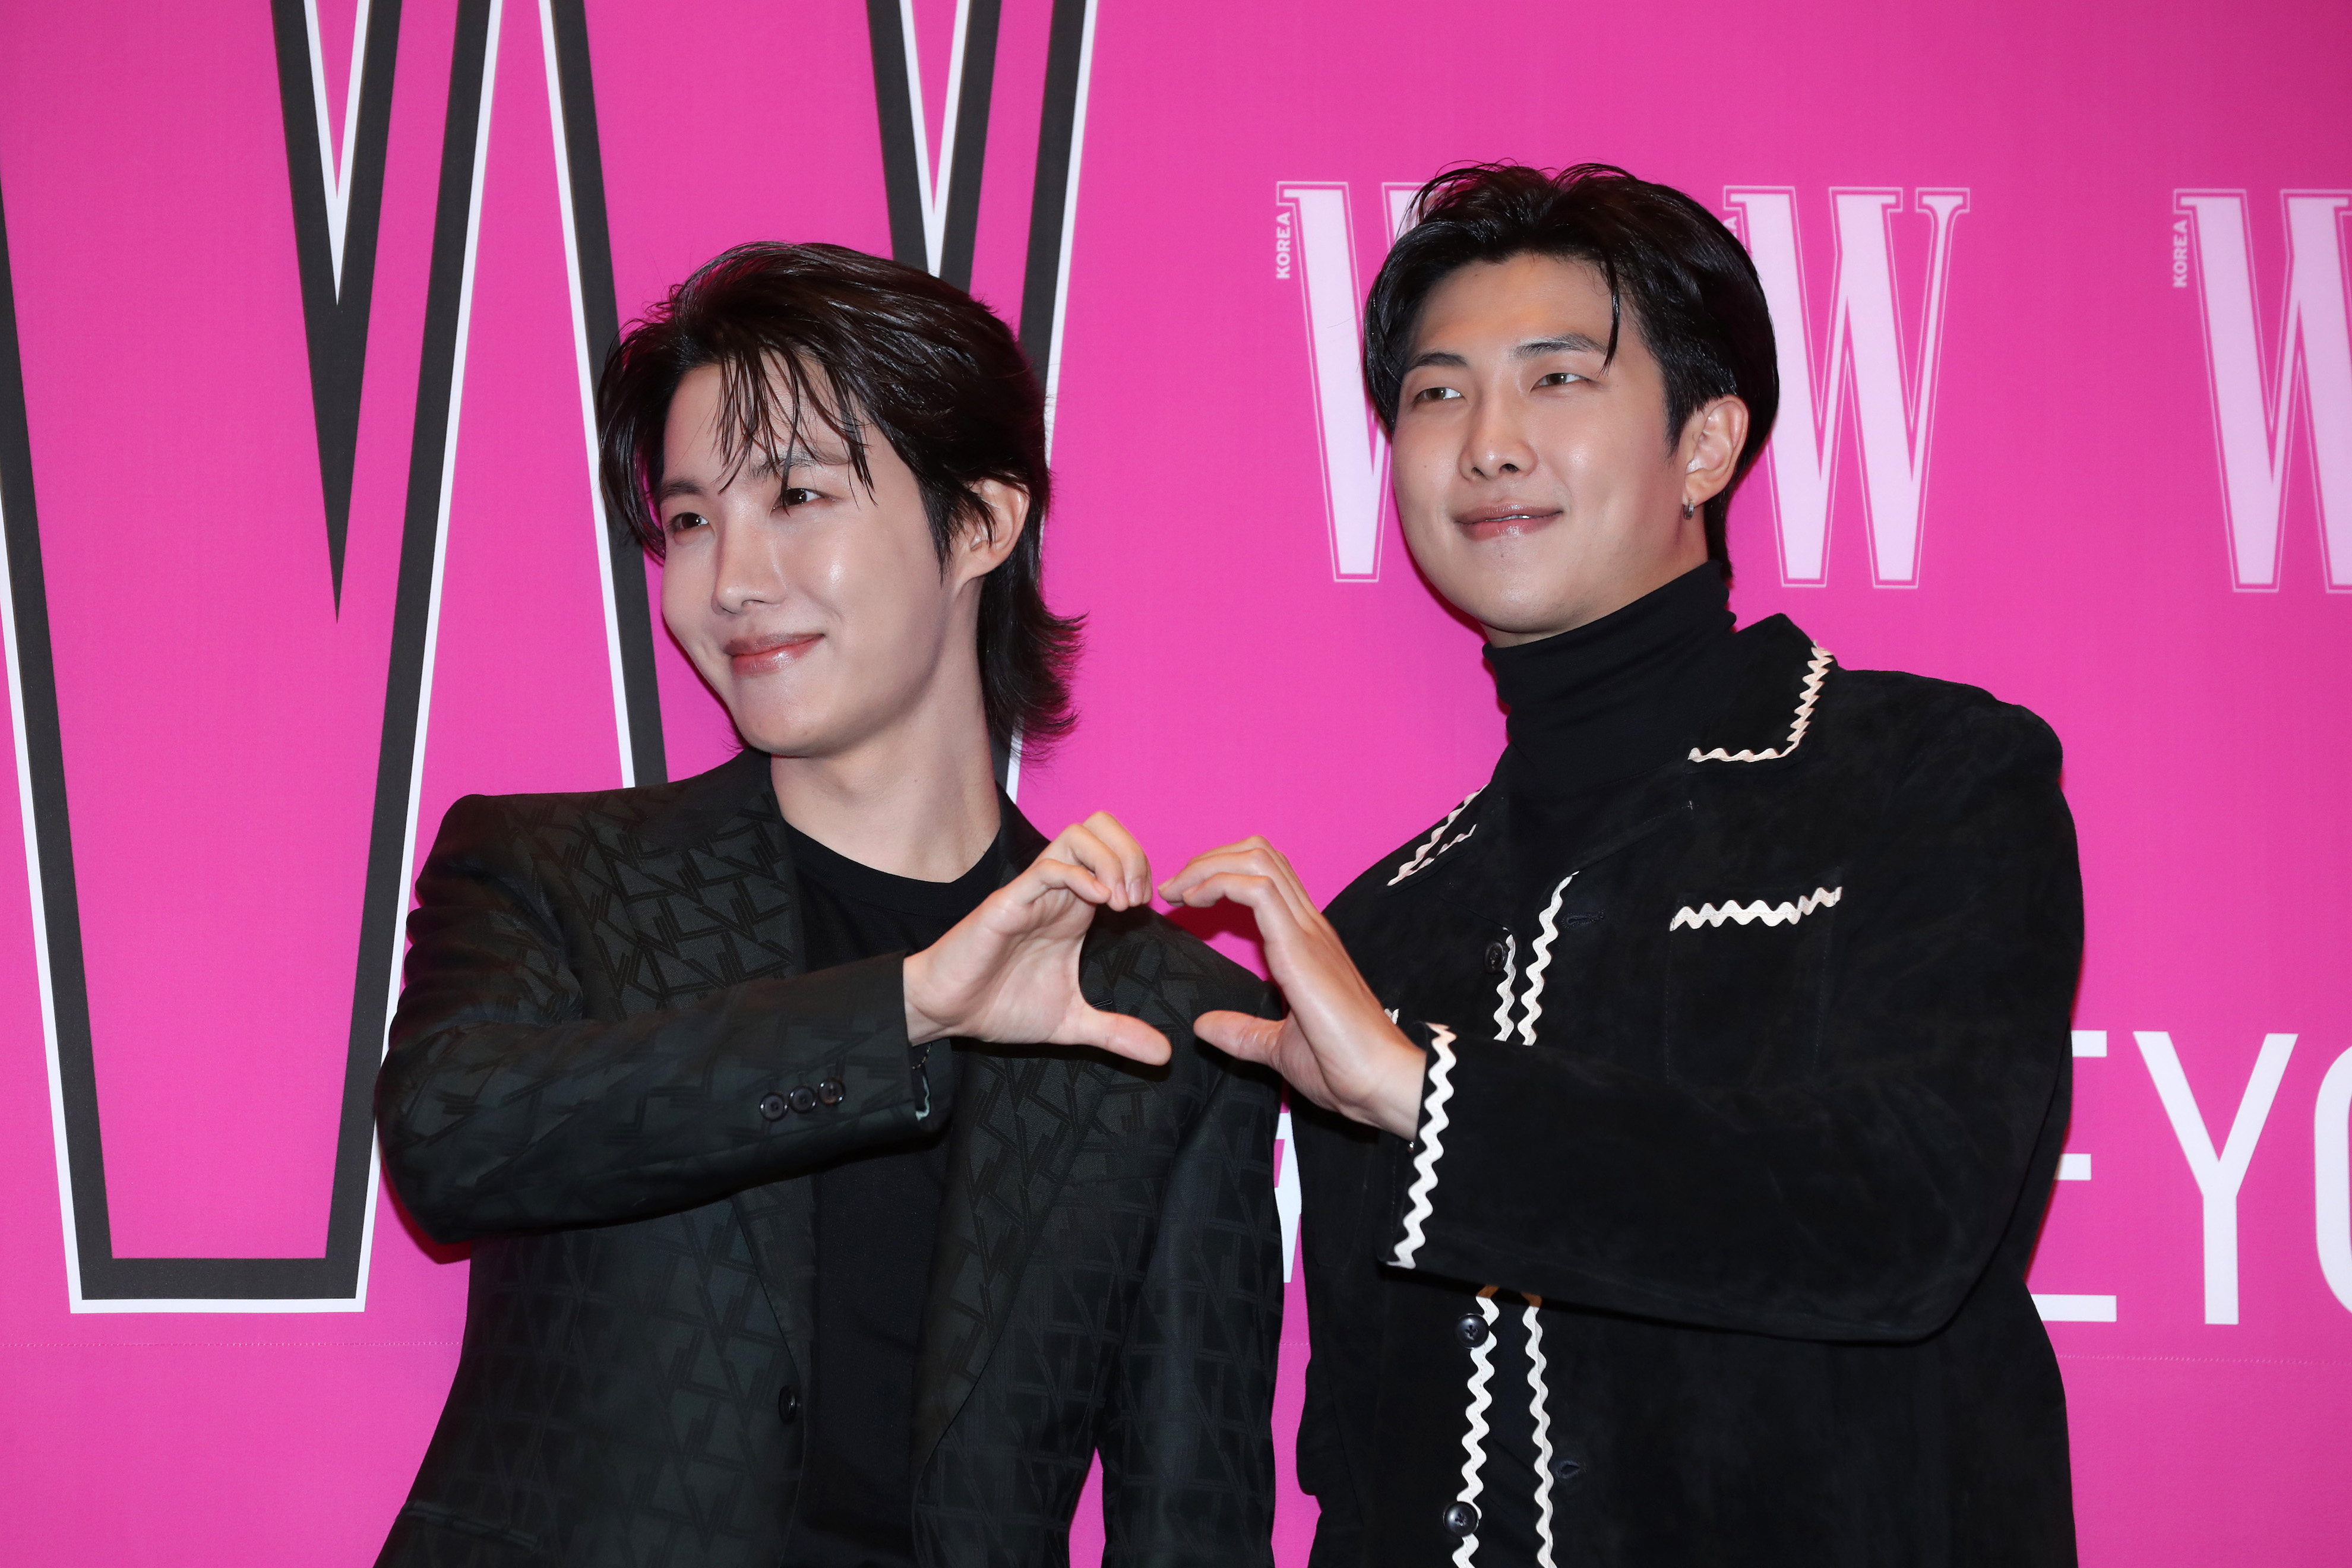 J-Hope and RM of BTS pose for photographs at the W Magazine Korea Breast Cancer Awareness Campaign 'Love Your W'  